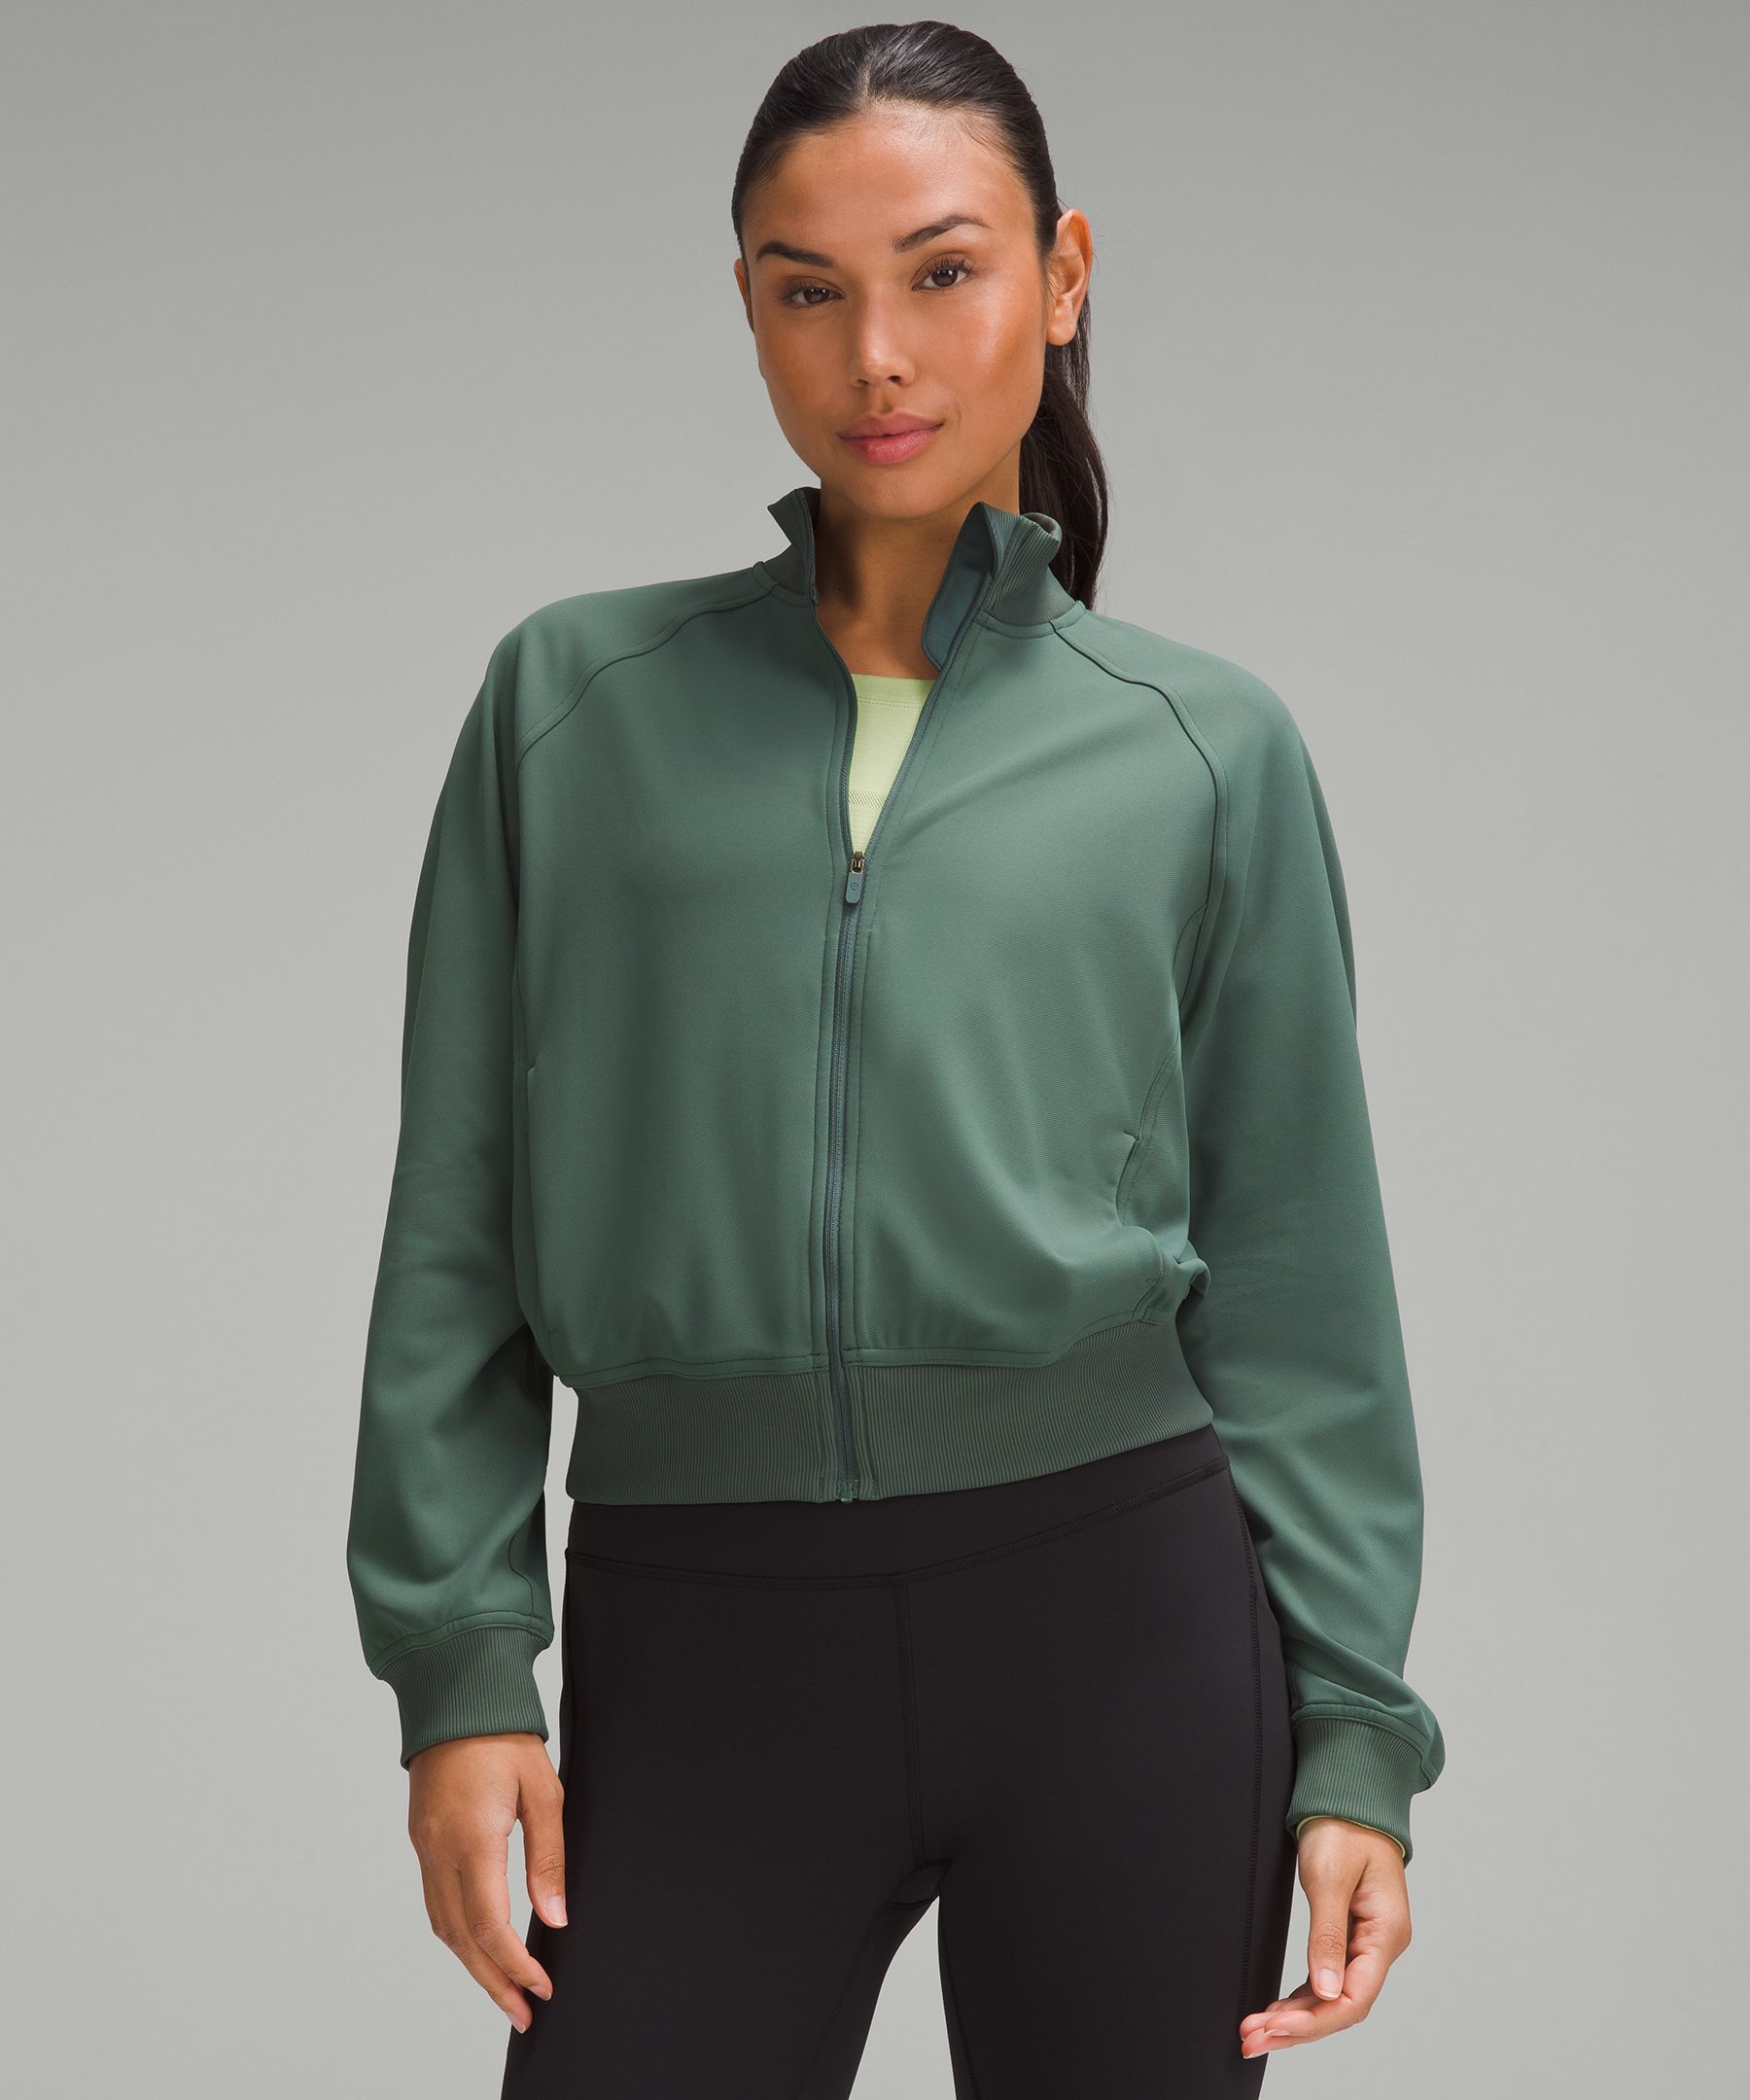 lululemon We Made Too Much restock sale: Sweaters, jackets, long